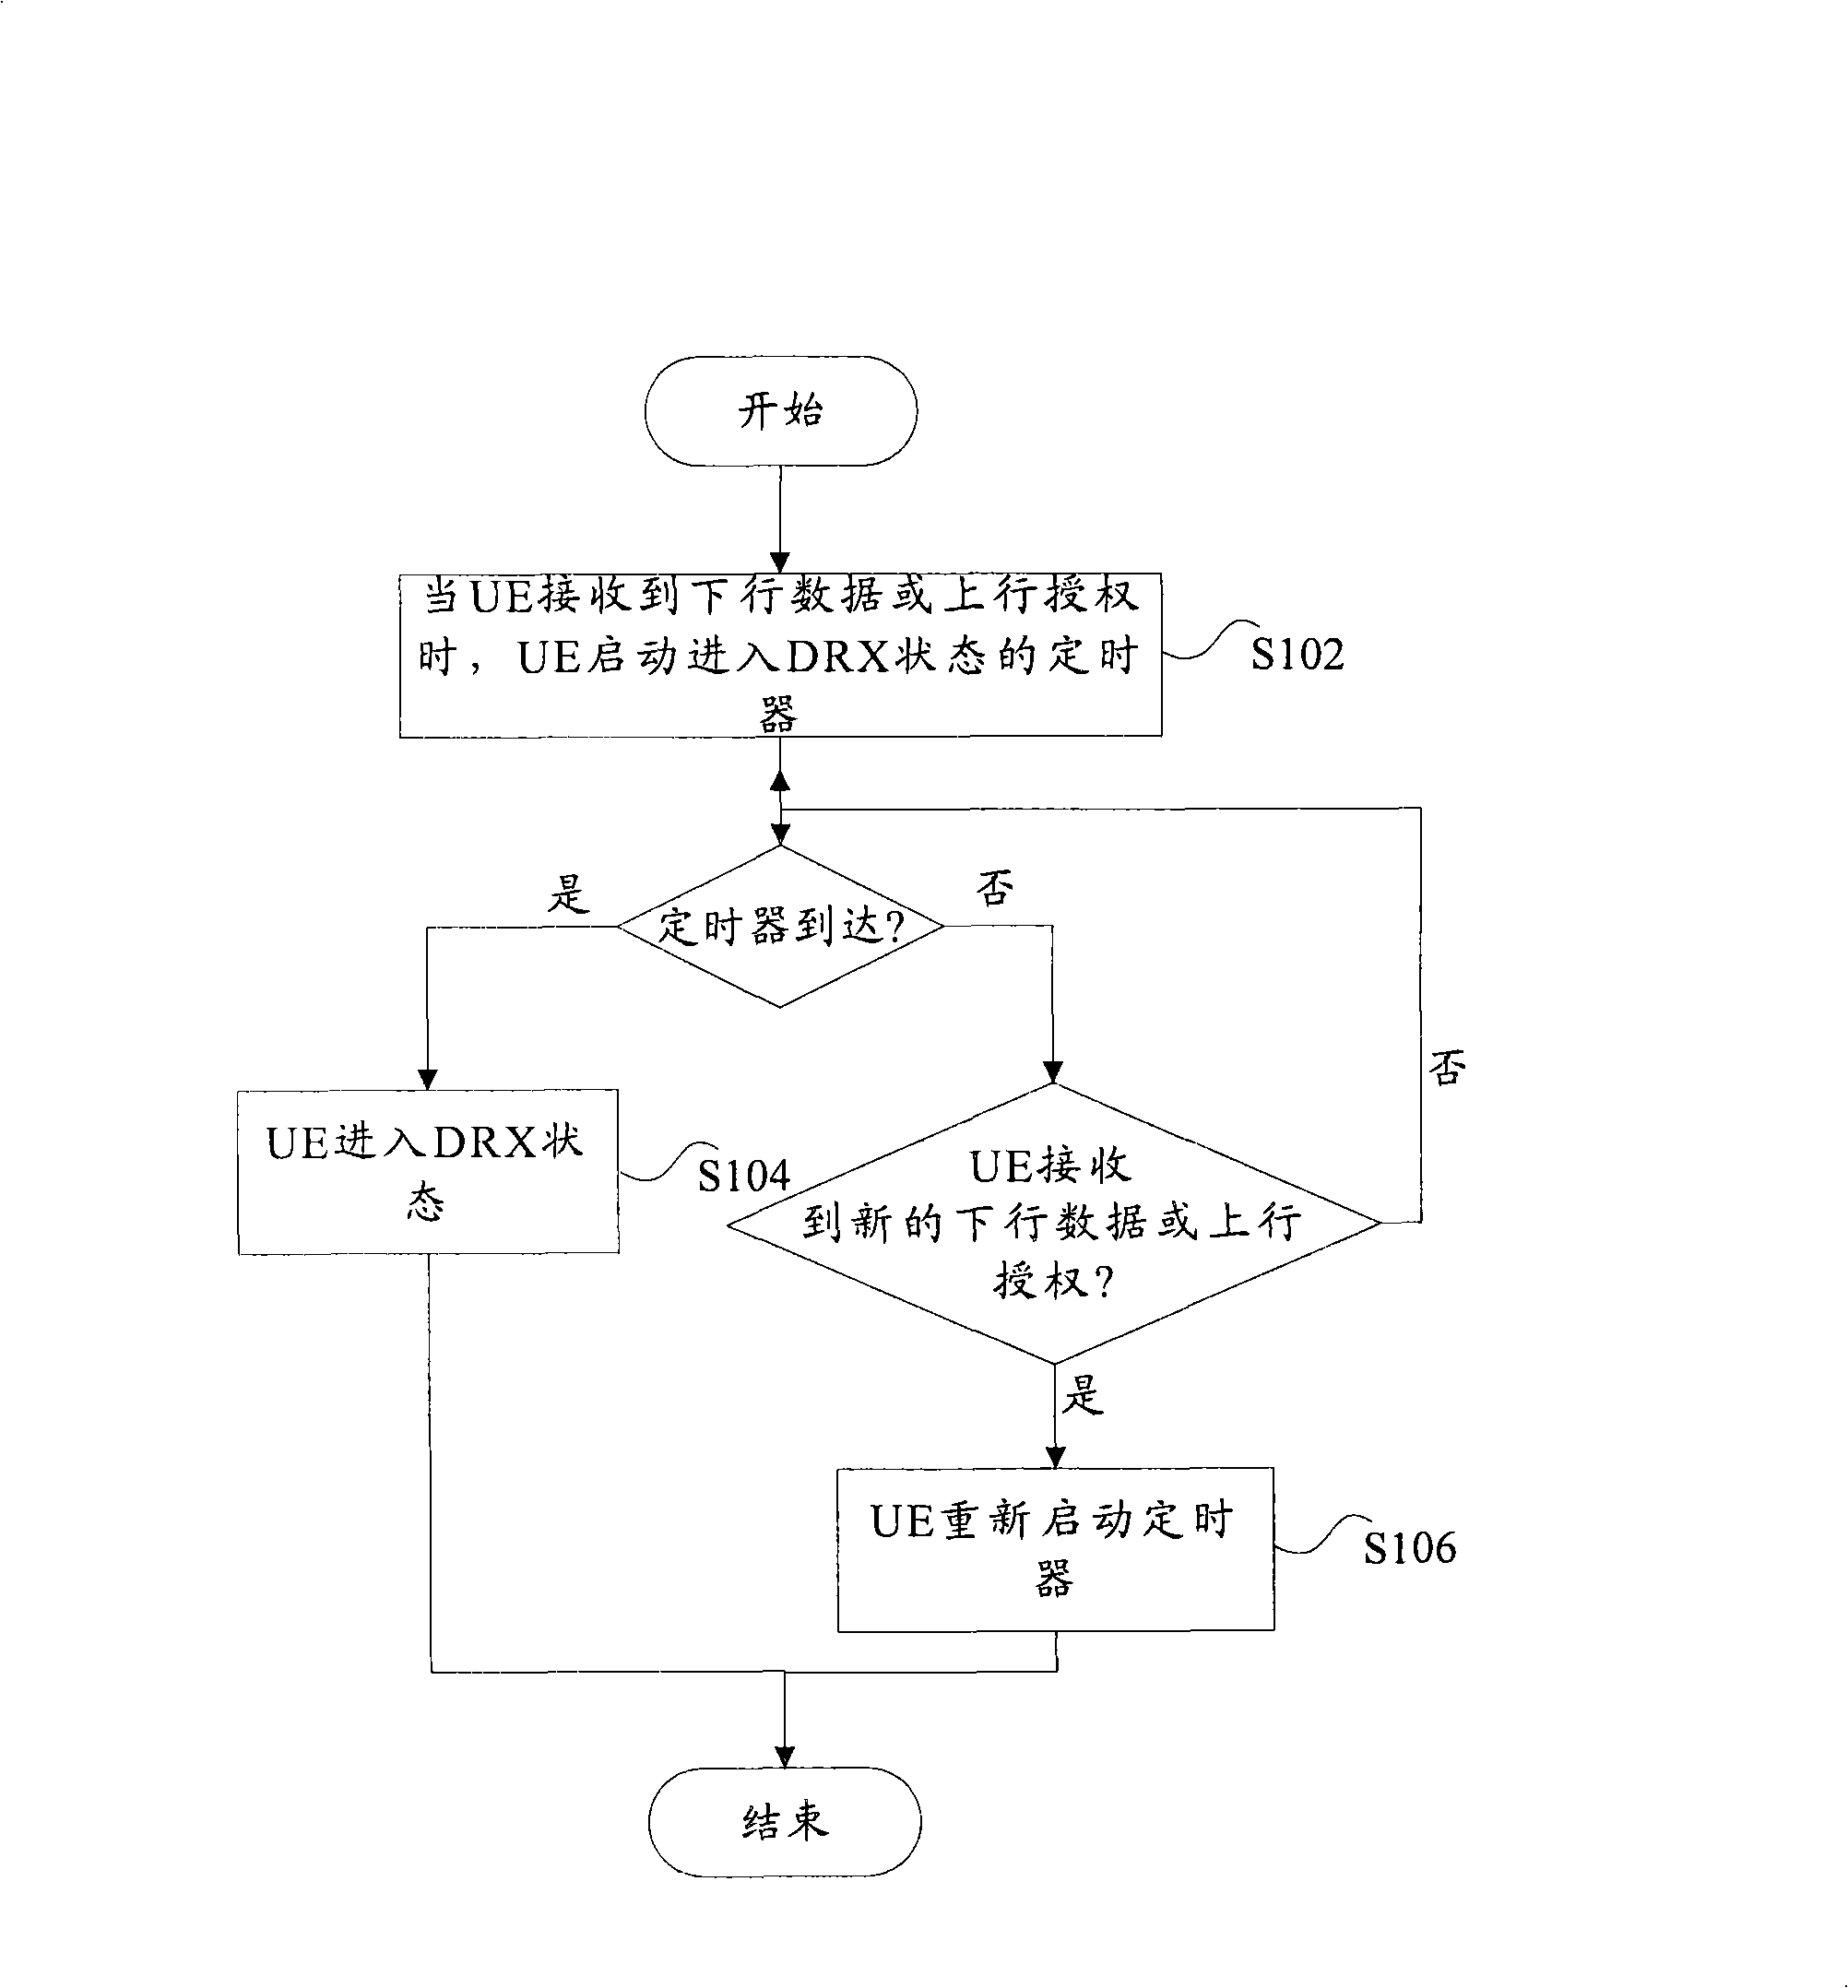 Method for user's set entering into incontinuous receiving condition